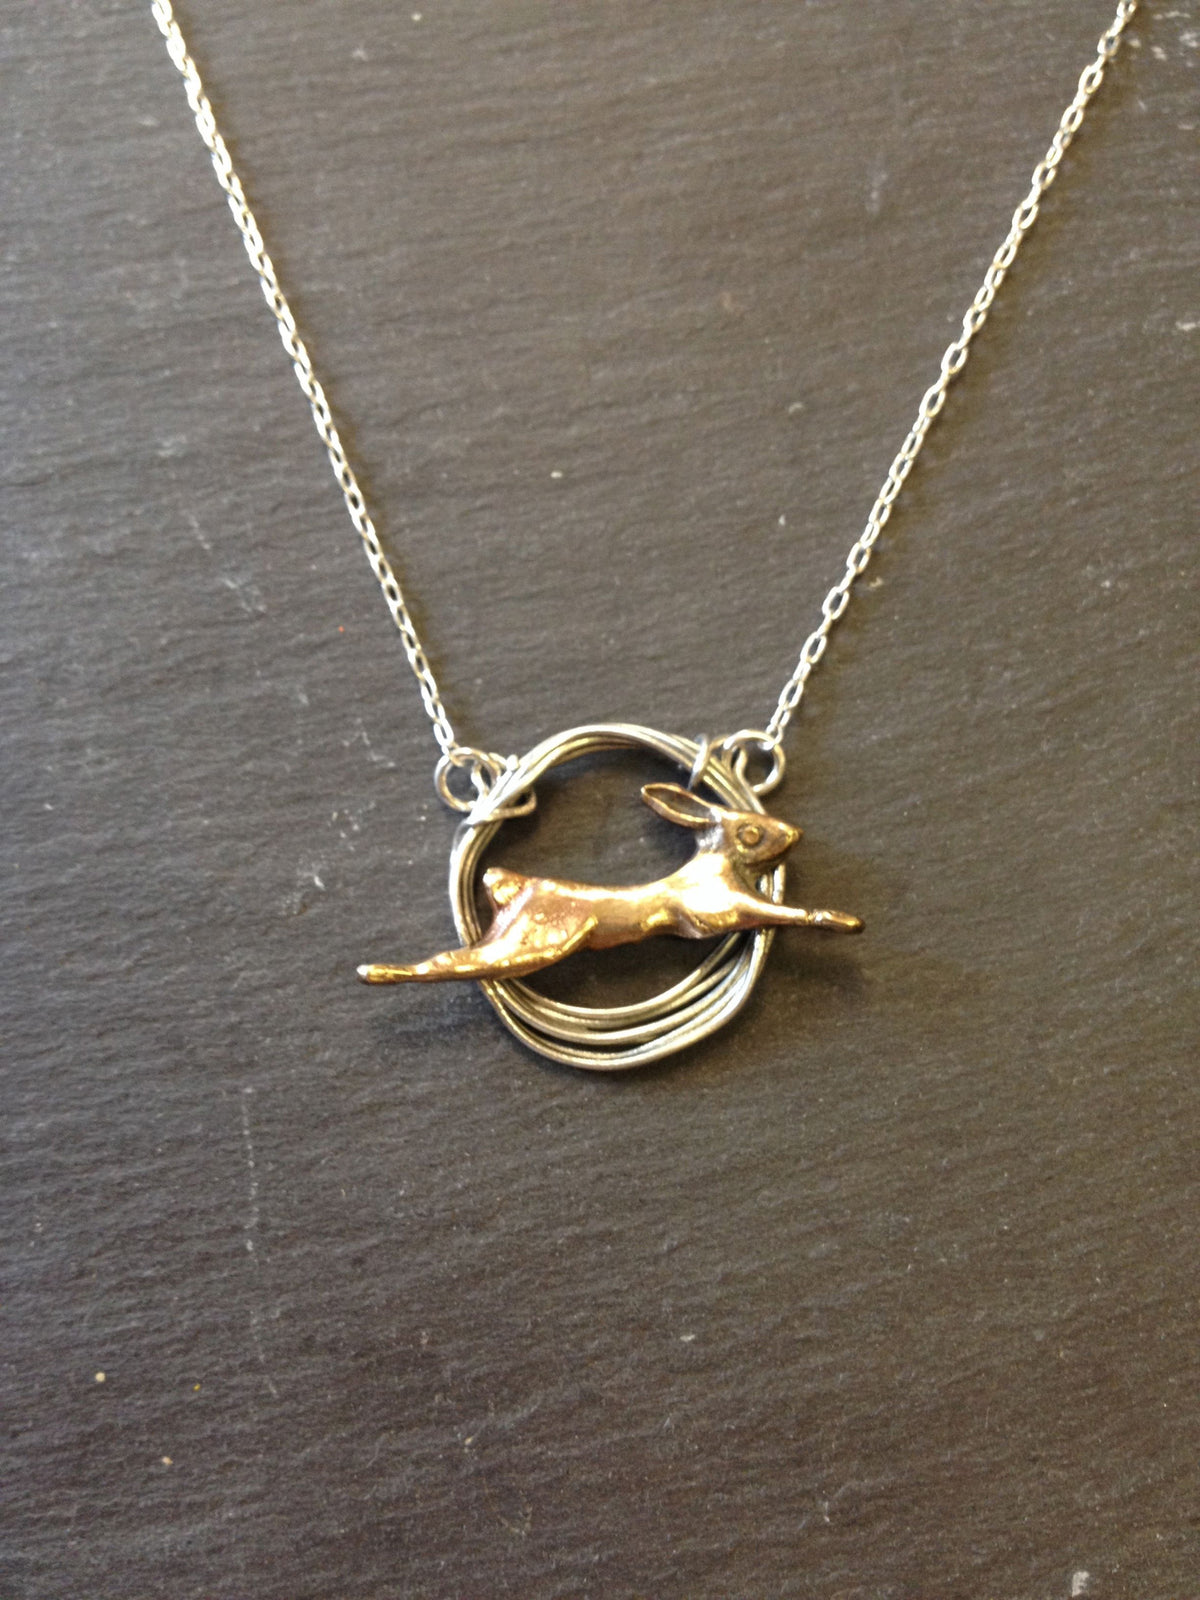 Large Hare in Hoop Necklace by Xuella Arnold